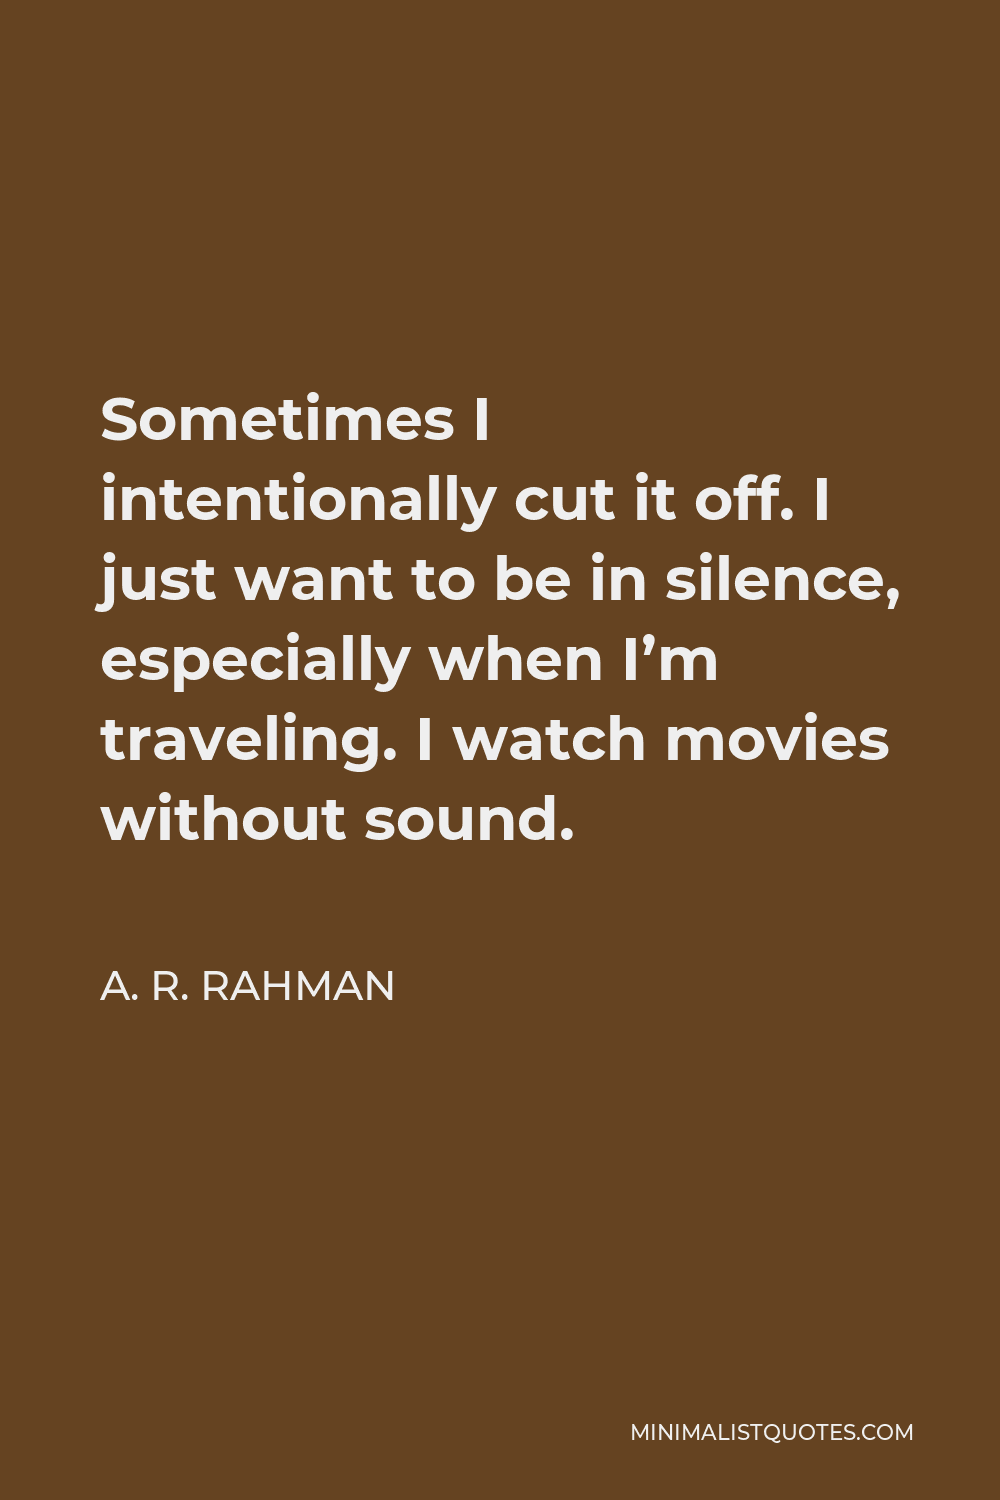 A. R. Rahman Quote - Sometimes I intentionally cut it off. I just want to be in silence, especially when I’m traveling. I watch movies without sound.